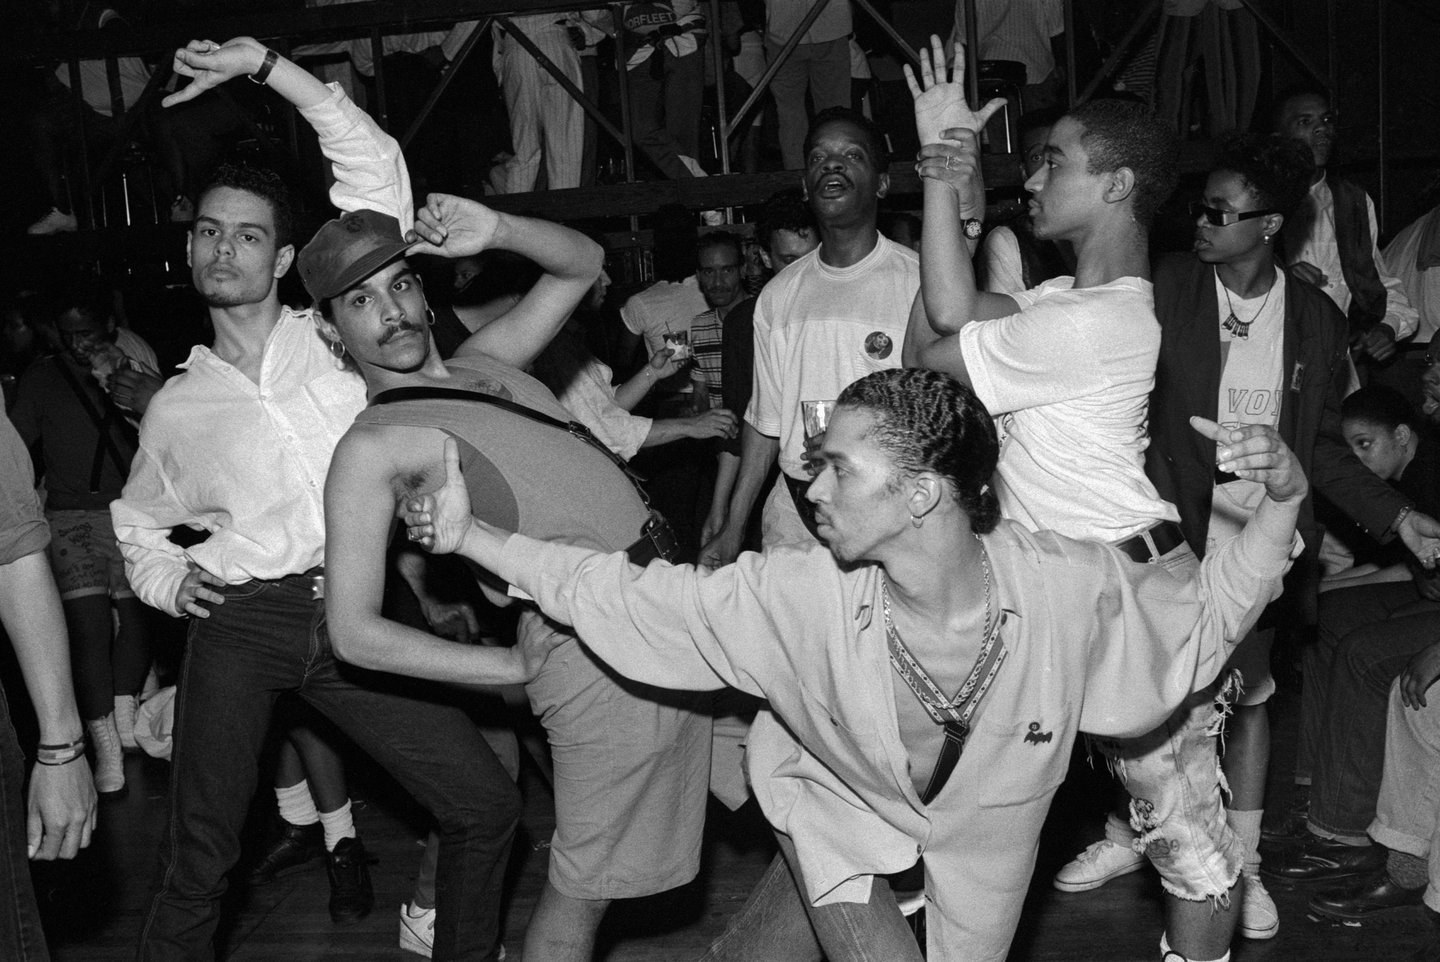 In vogue: How photographer Chantal Regnault captured the Harlem ball scene’s rise to fame